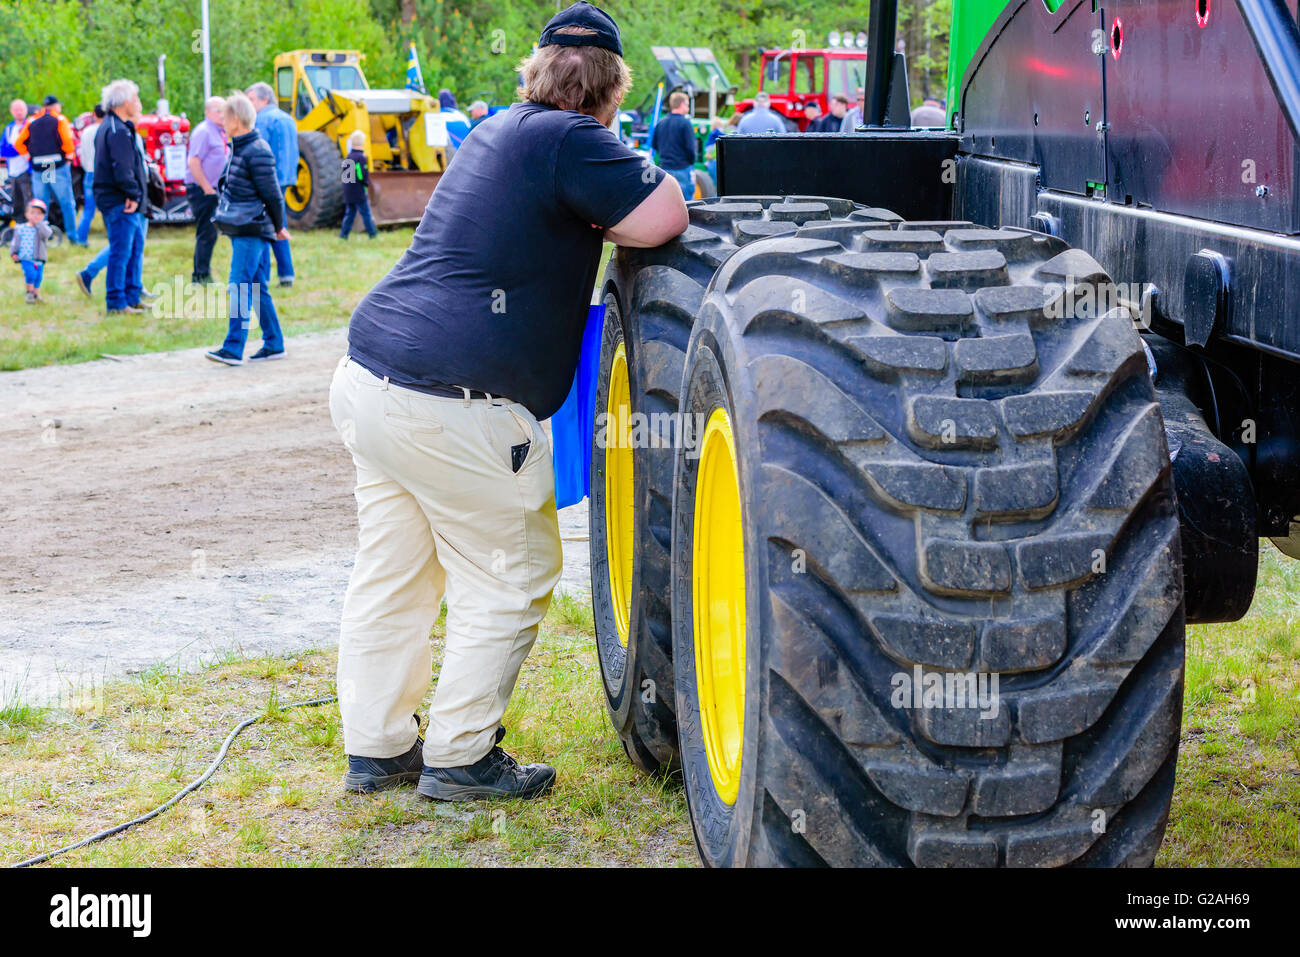 Emmaboda, Sweden - May 14, 2016: Forest and tractor (Skog och traktor) fair. Large person leaning against some large forwarder o Stock Photo